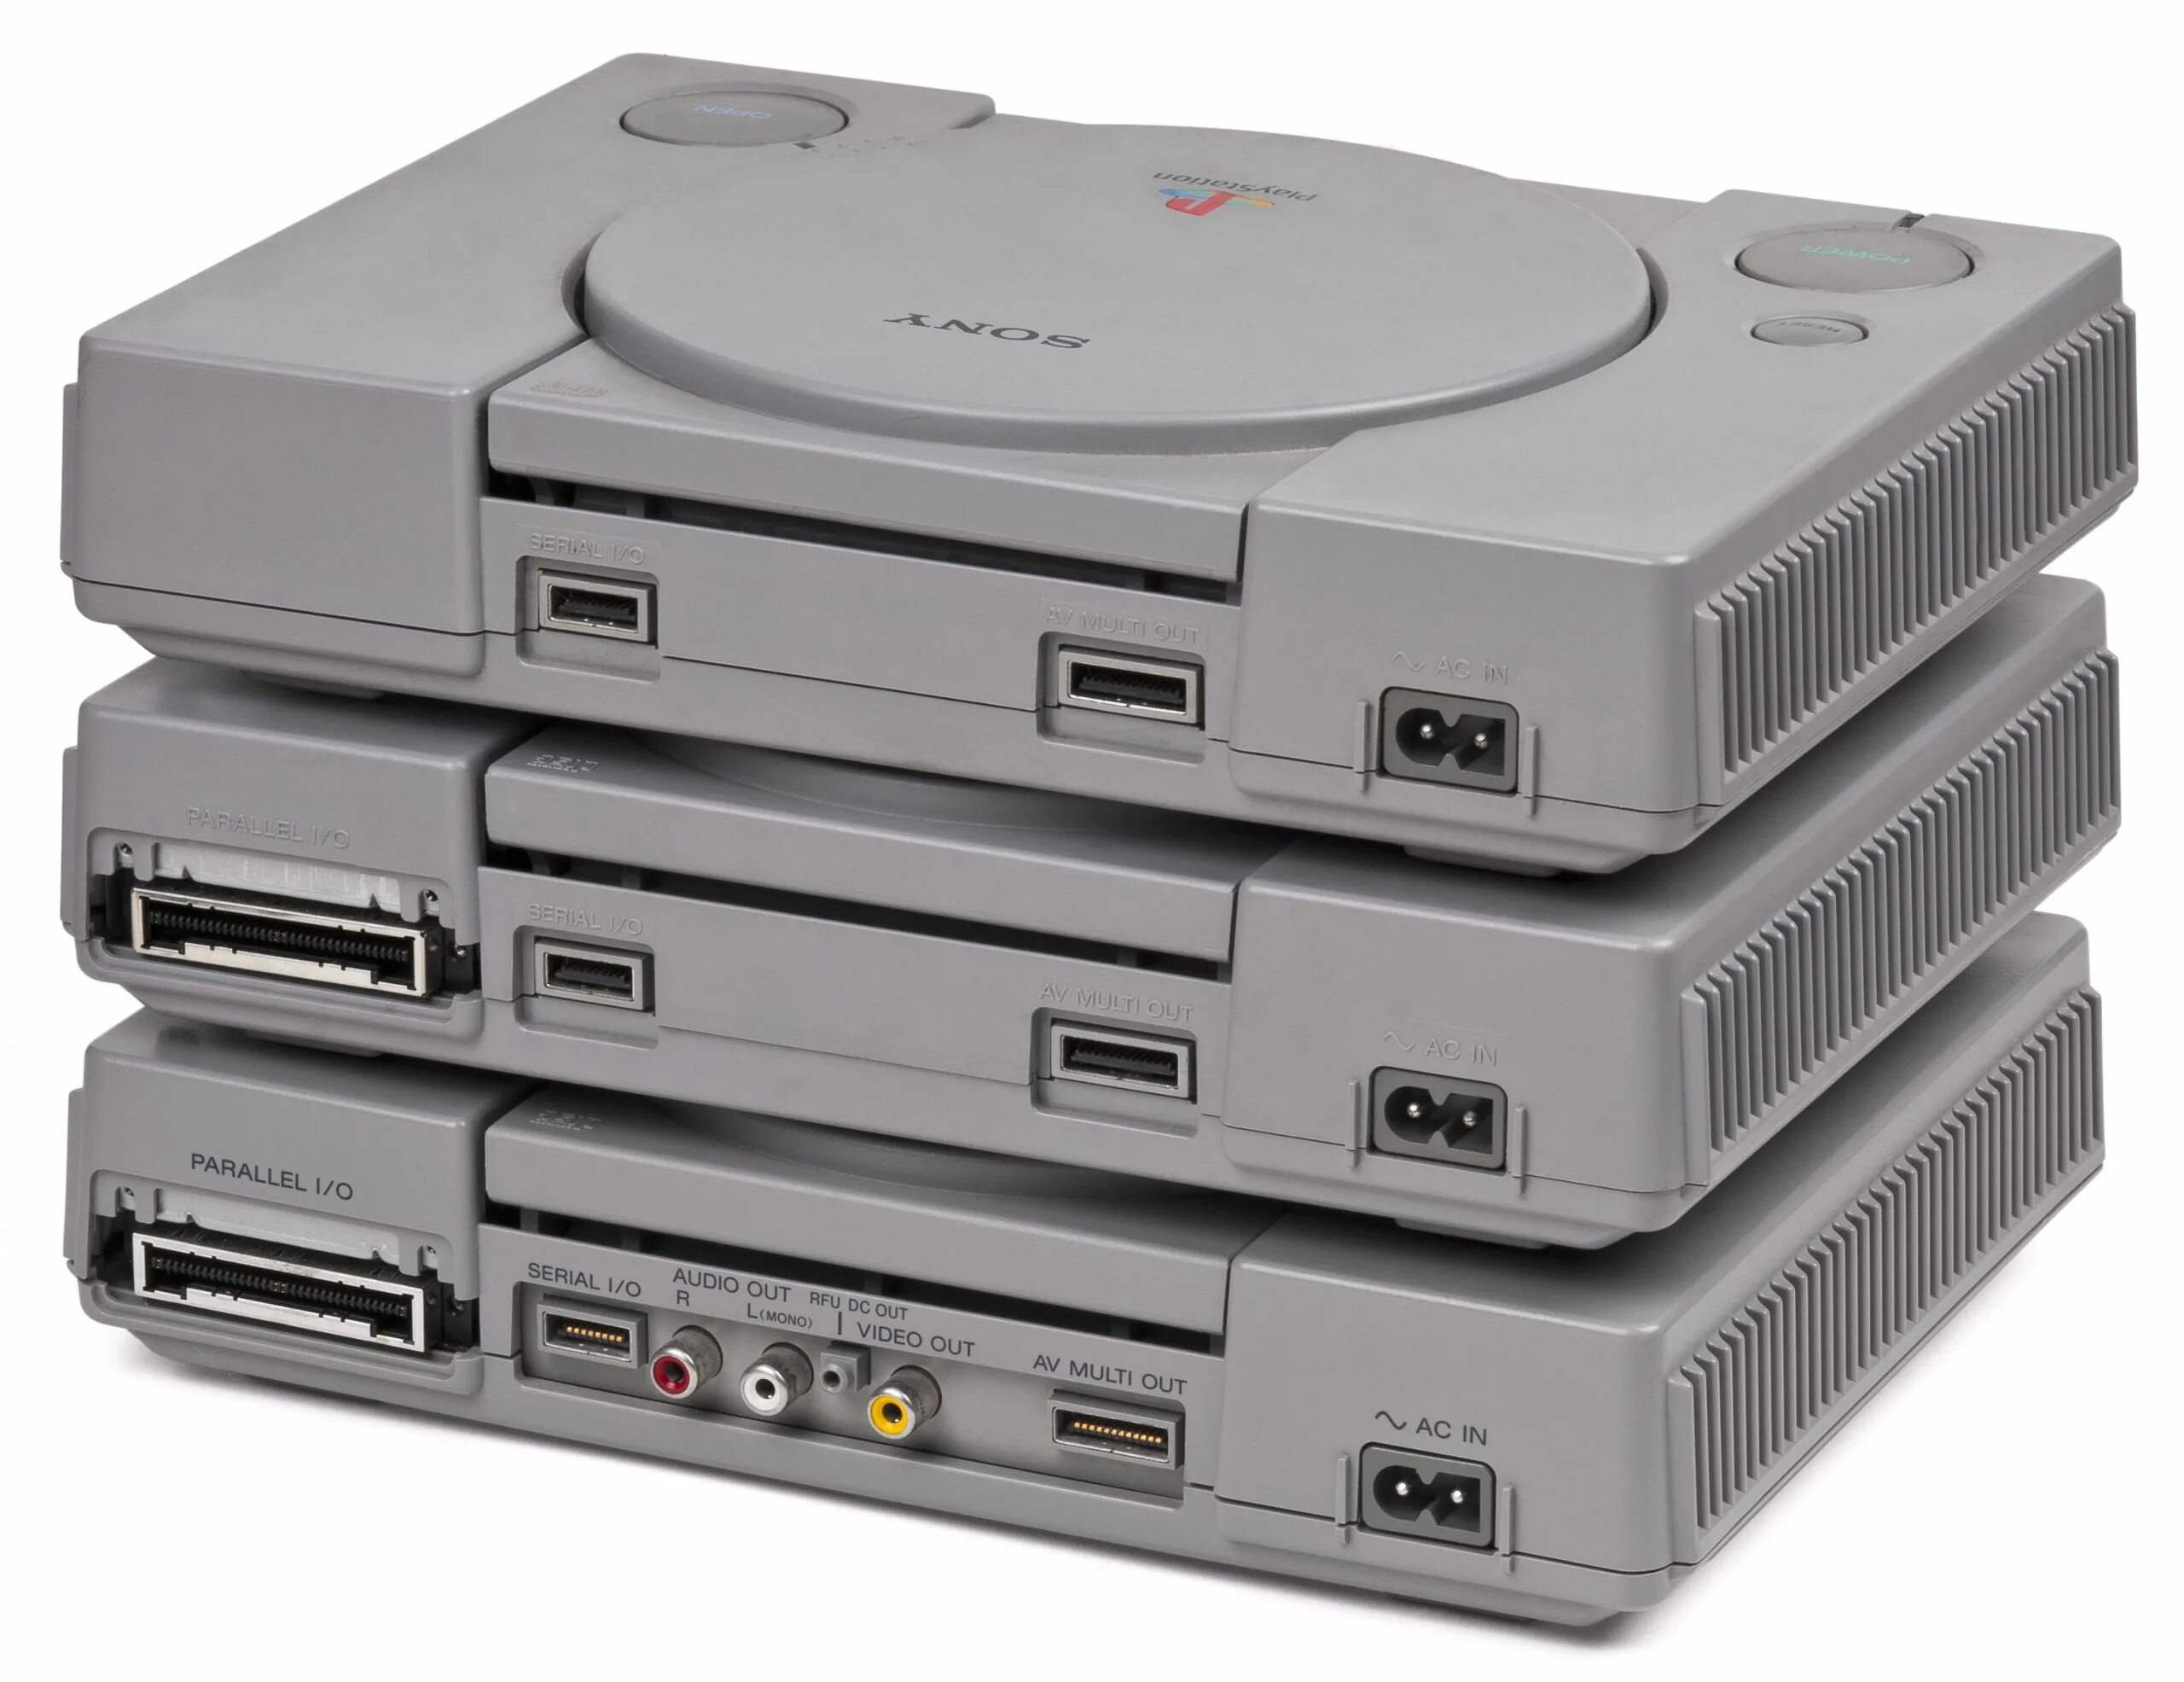 Sony PLAYSTATION 1. Sony PLAYSTATION ps1. Ps1 SCPH 5903. Sony PSX PLAYSTATION 1. Sony playstation cfi 2000